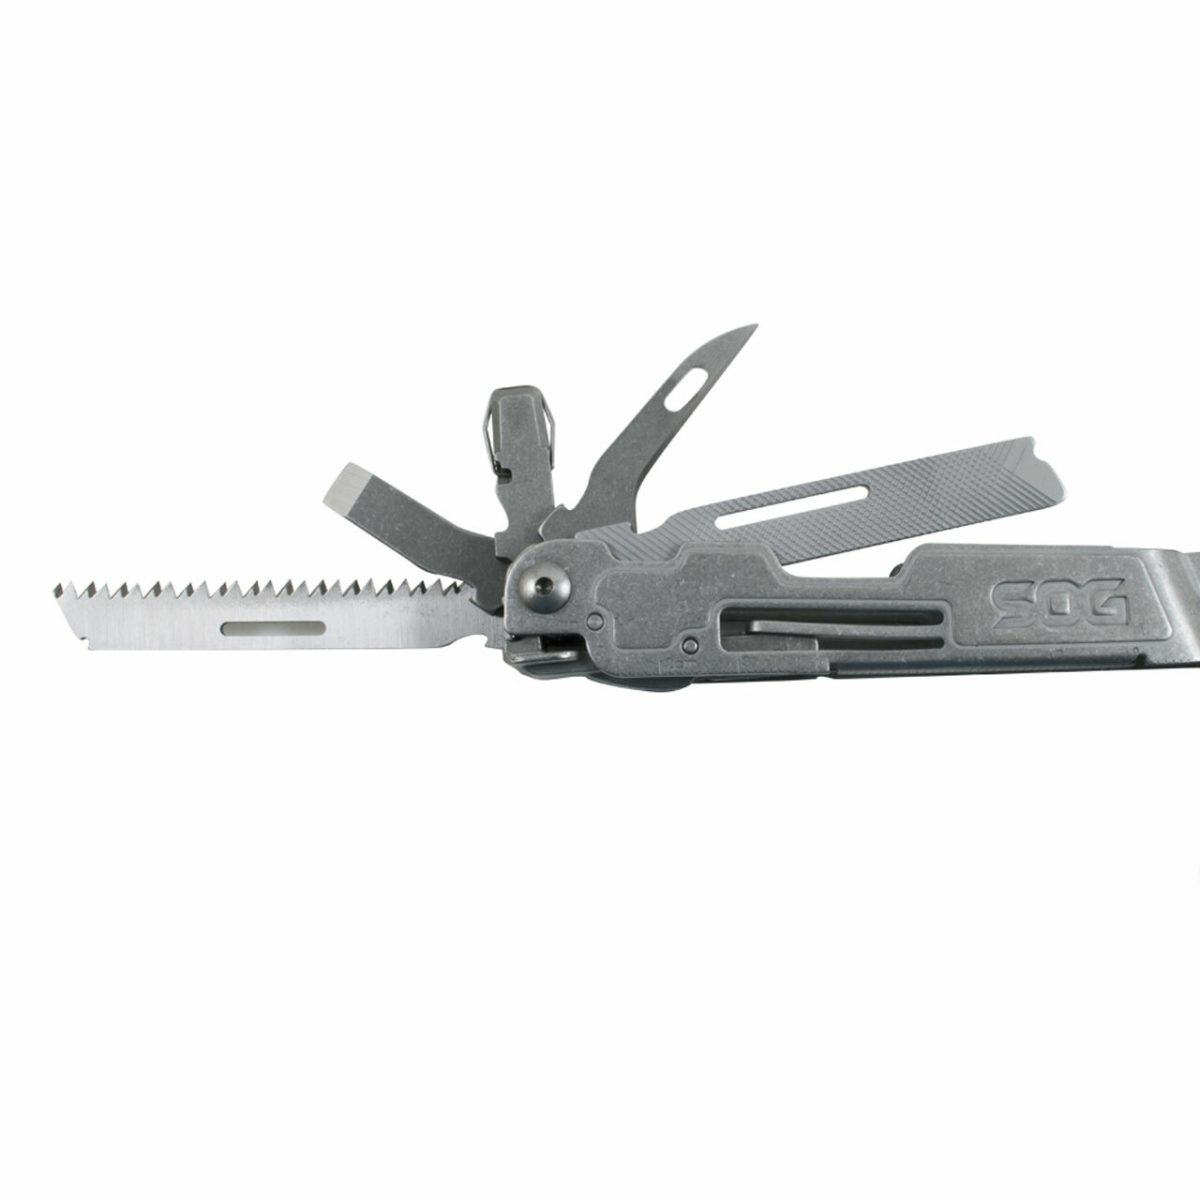 Multi tool SOG Poweraccess deluxe pa2002-cp 4.5